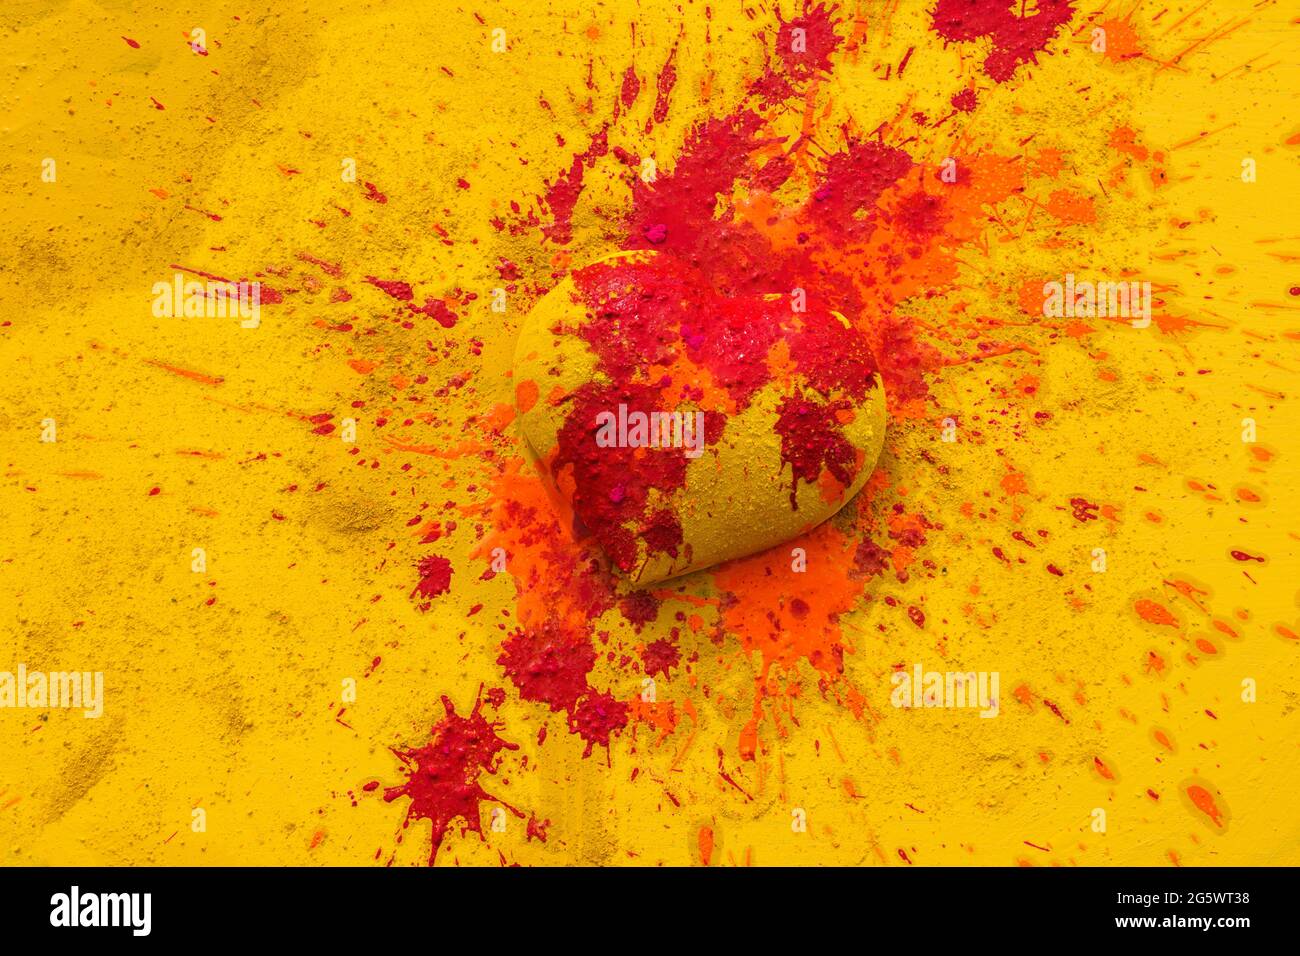 Yellow heart on yellow background splattered with orange and red paint. Stock Photo